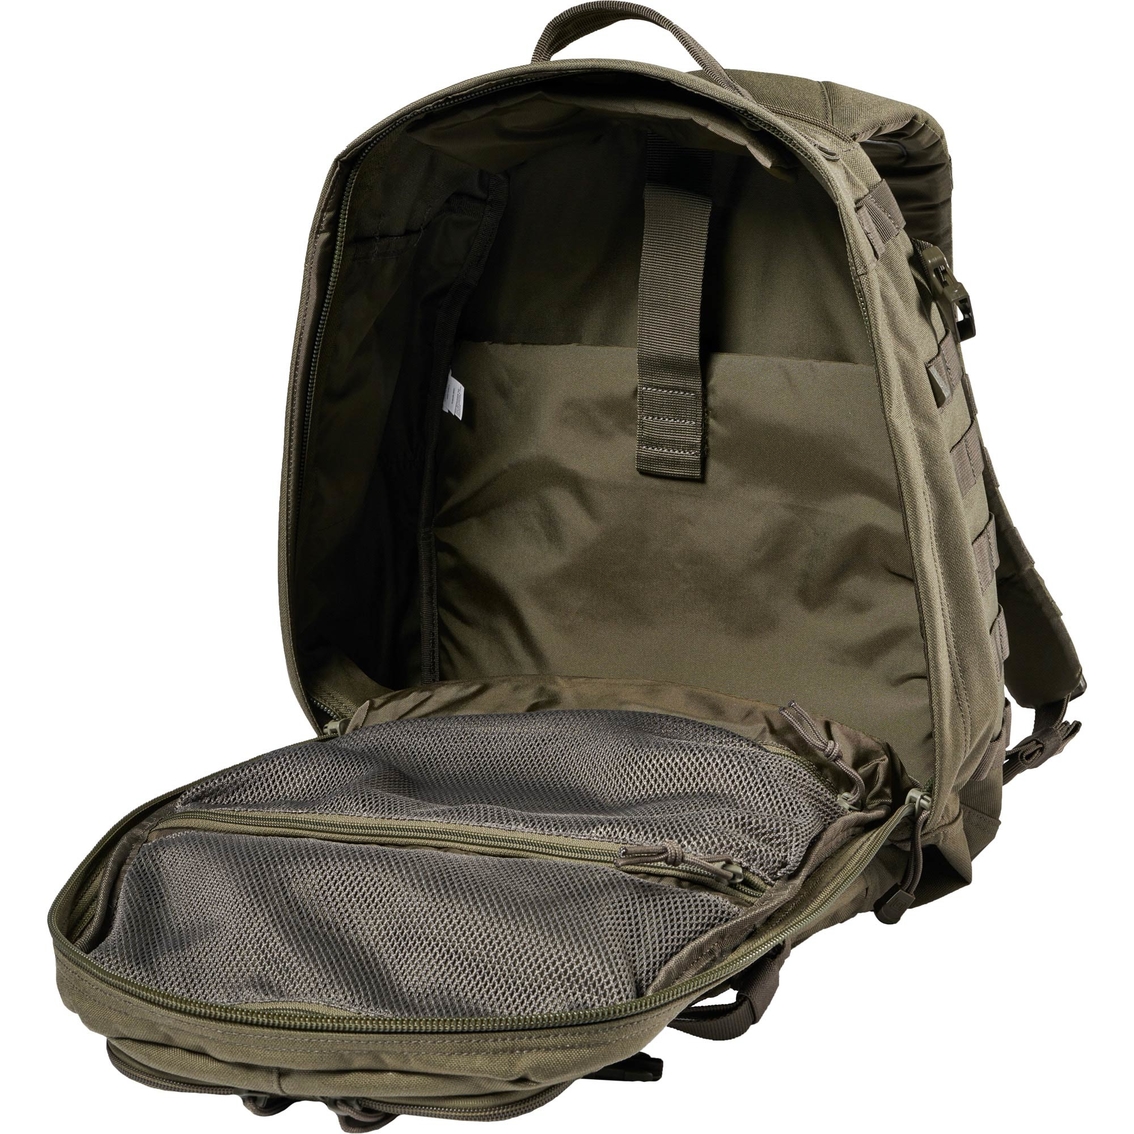 5.11 RUSH 24 2.0 Backpack - Image 8 of 9